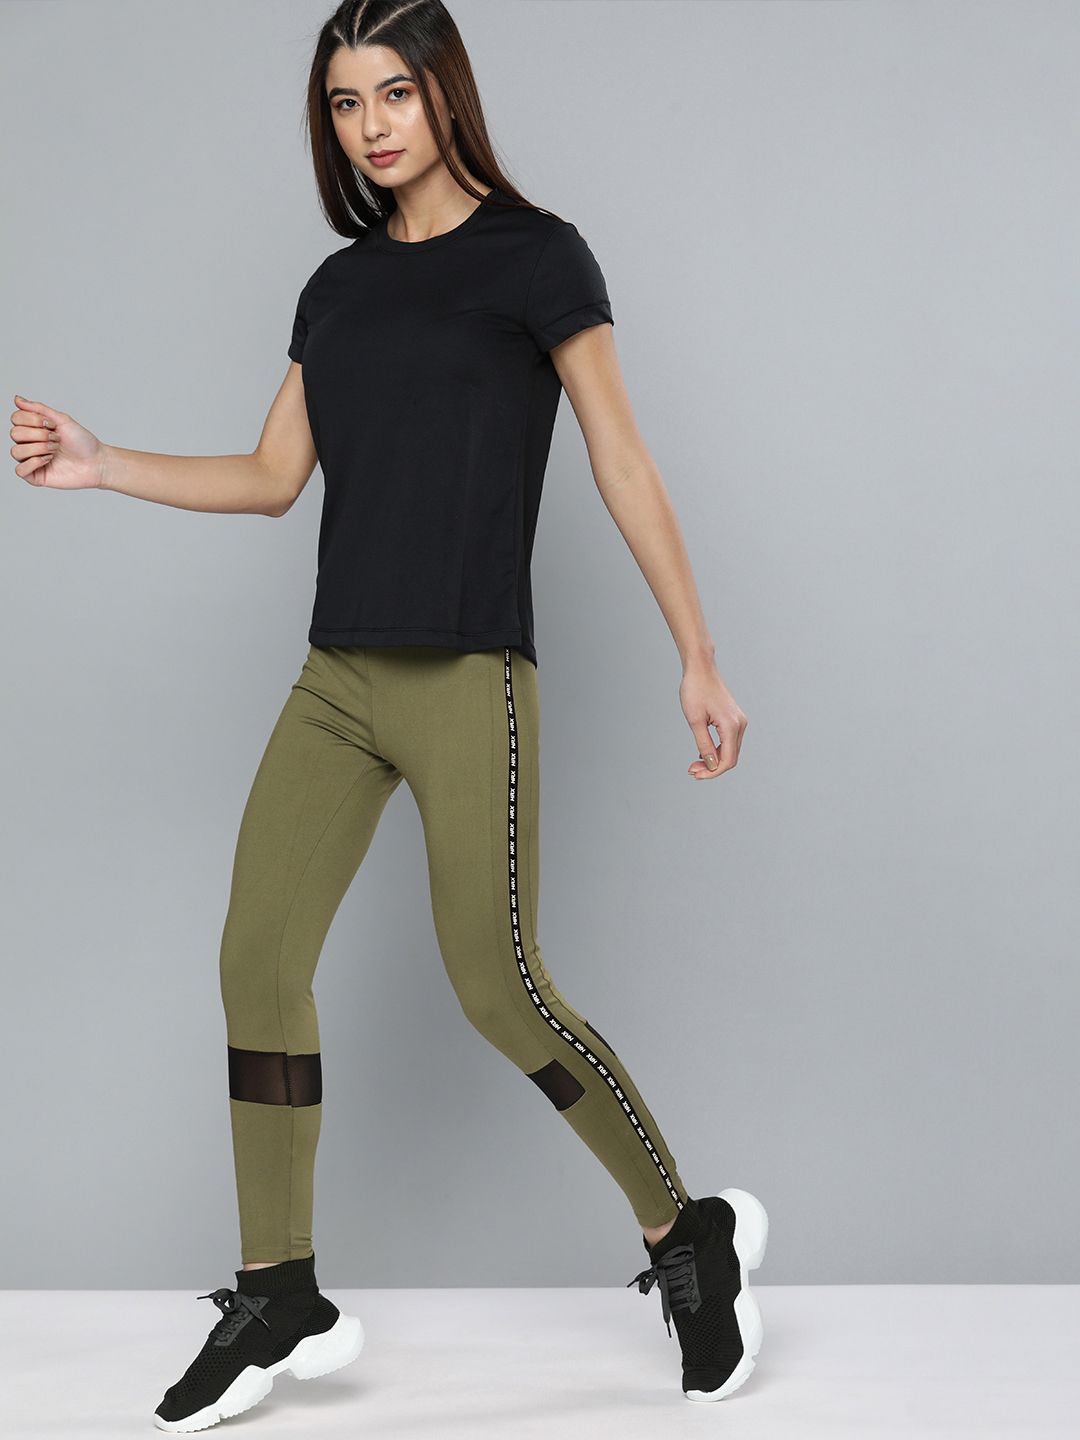 HRX By Hrithik Roshan Running Women Burnt Olive Rapid-Dry Brand Carrier Tights Price in India